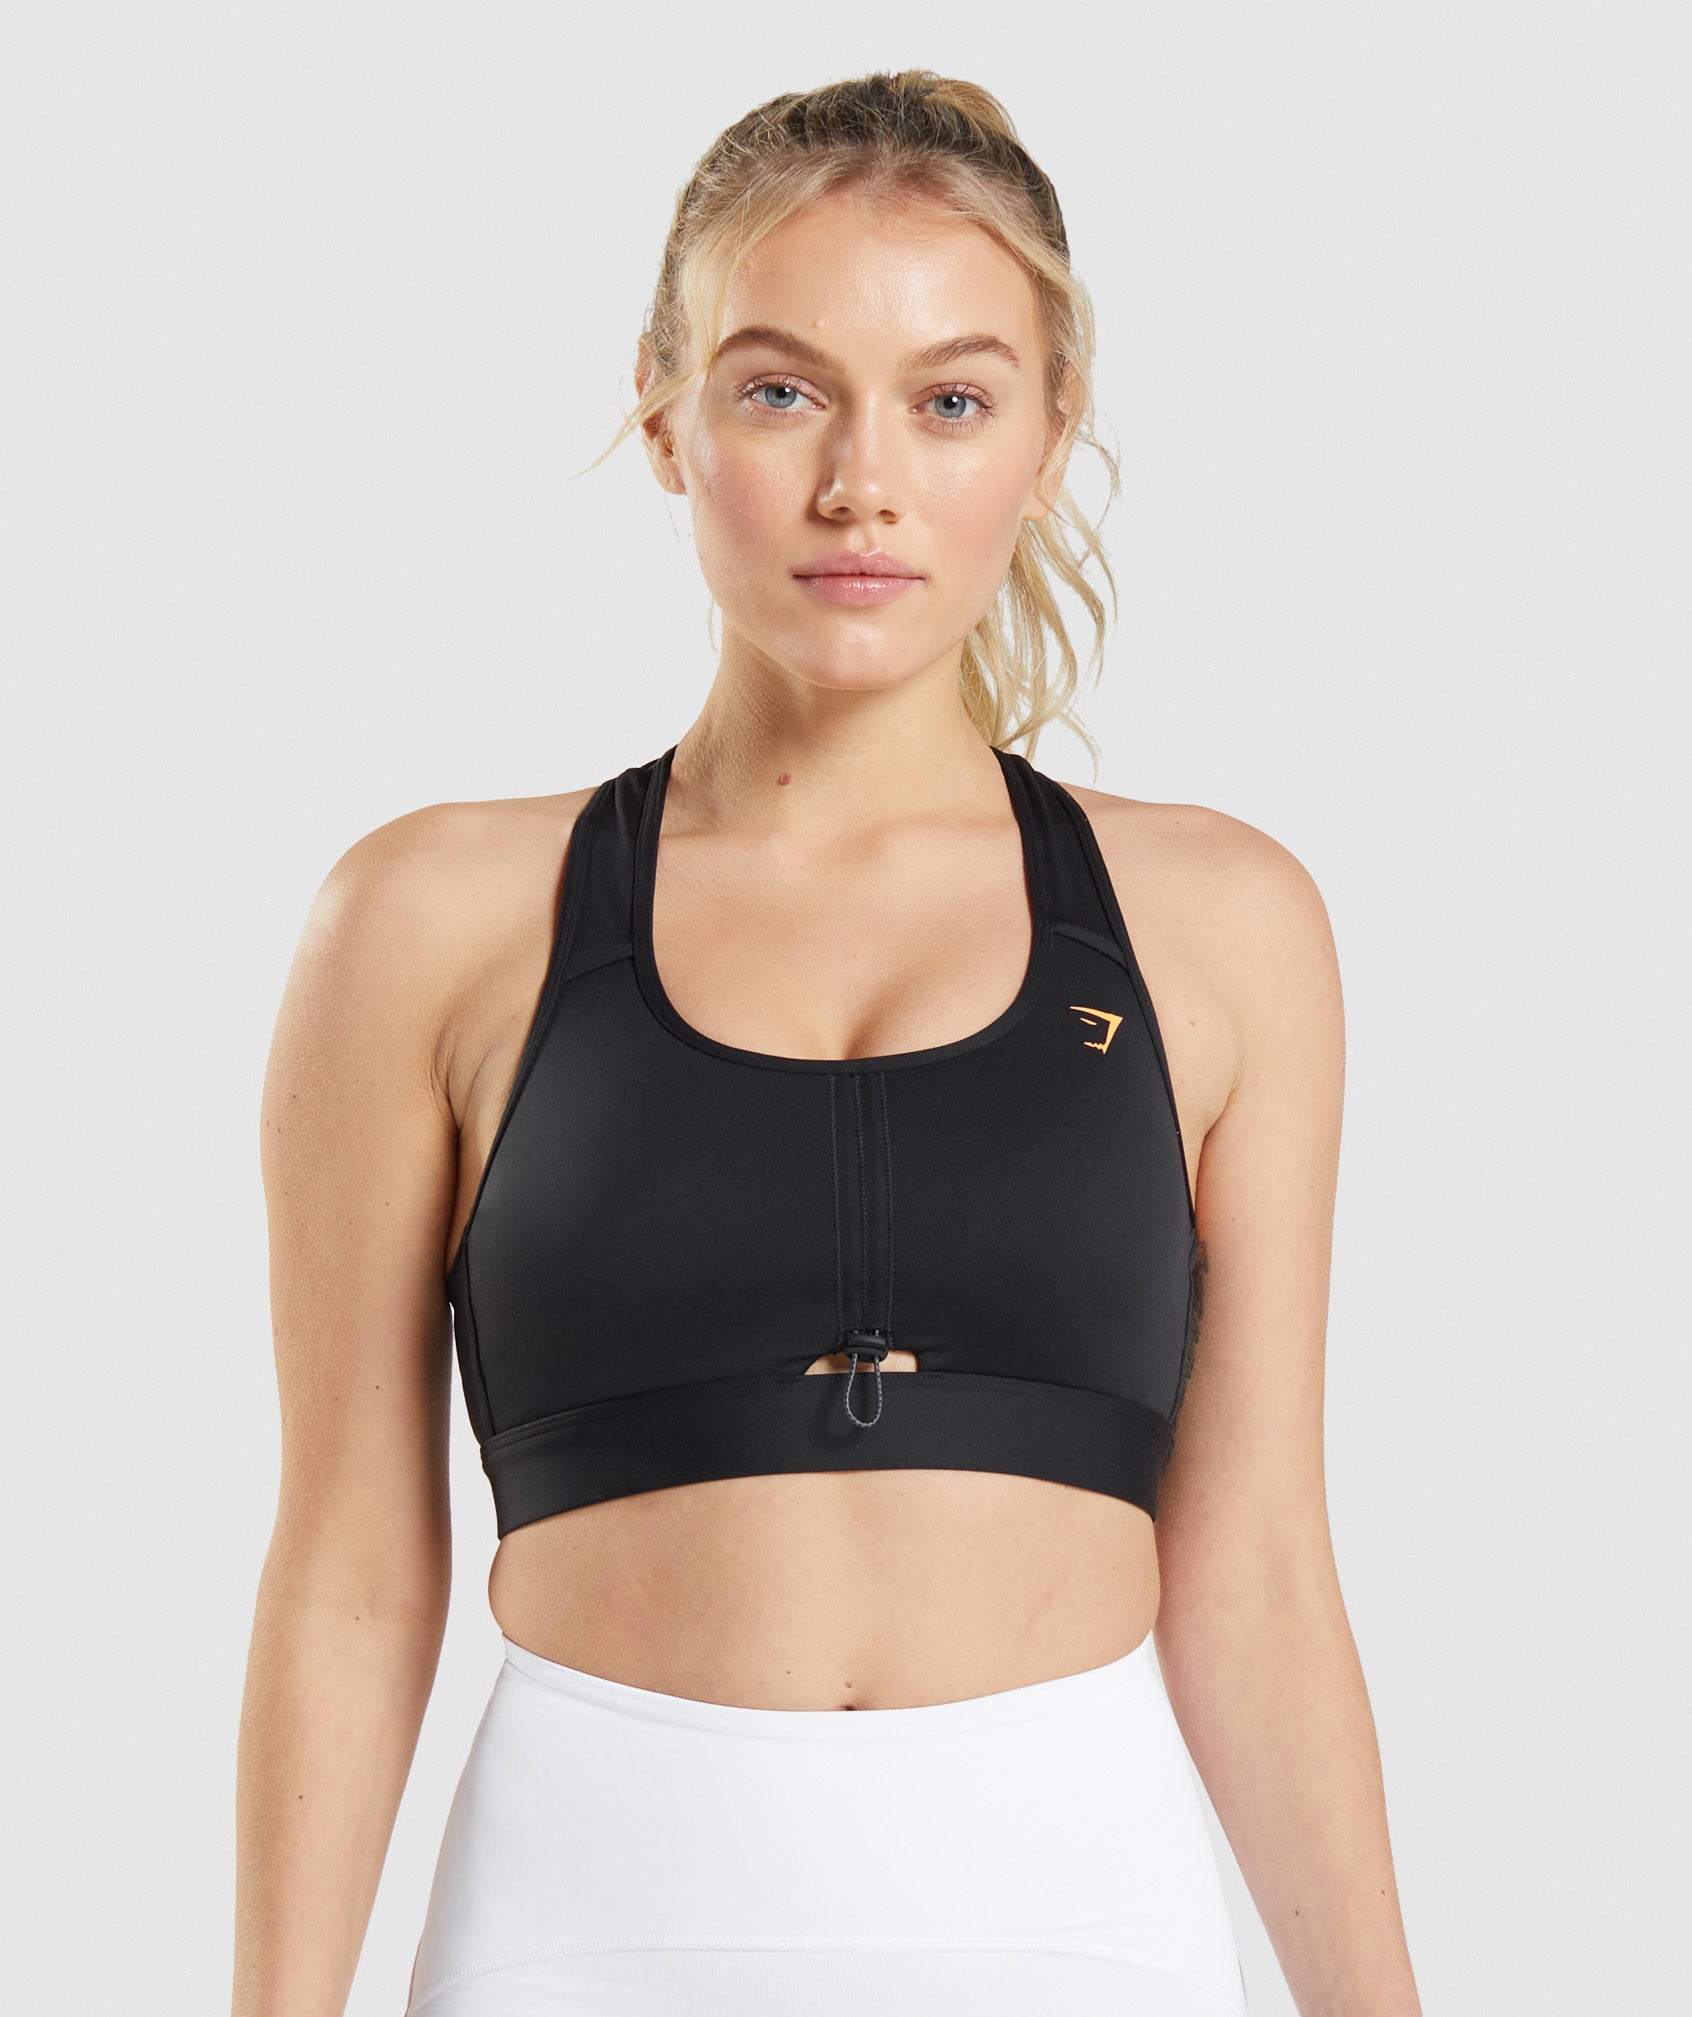 Gymshark Front Closure Sports Bras for Women